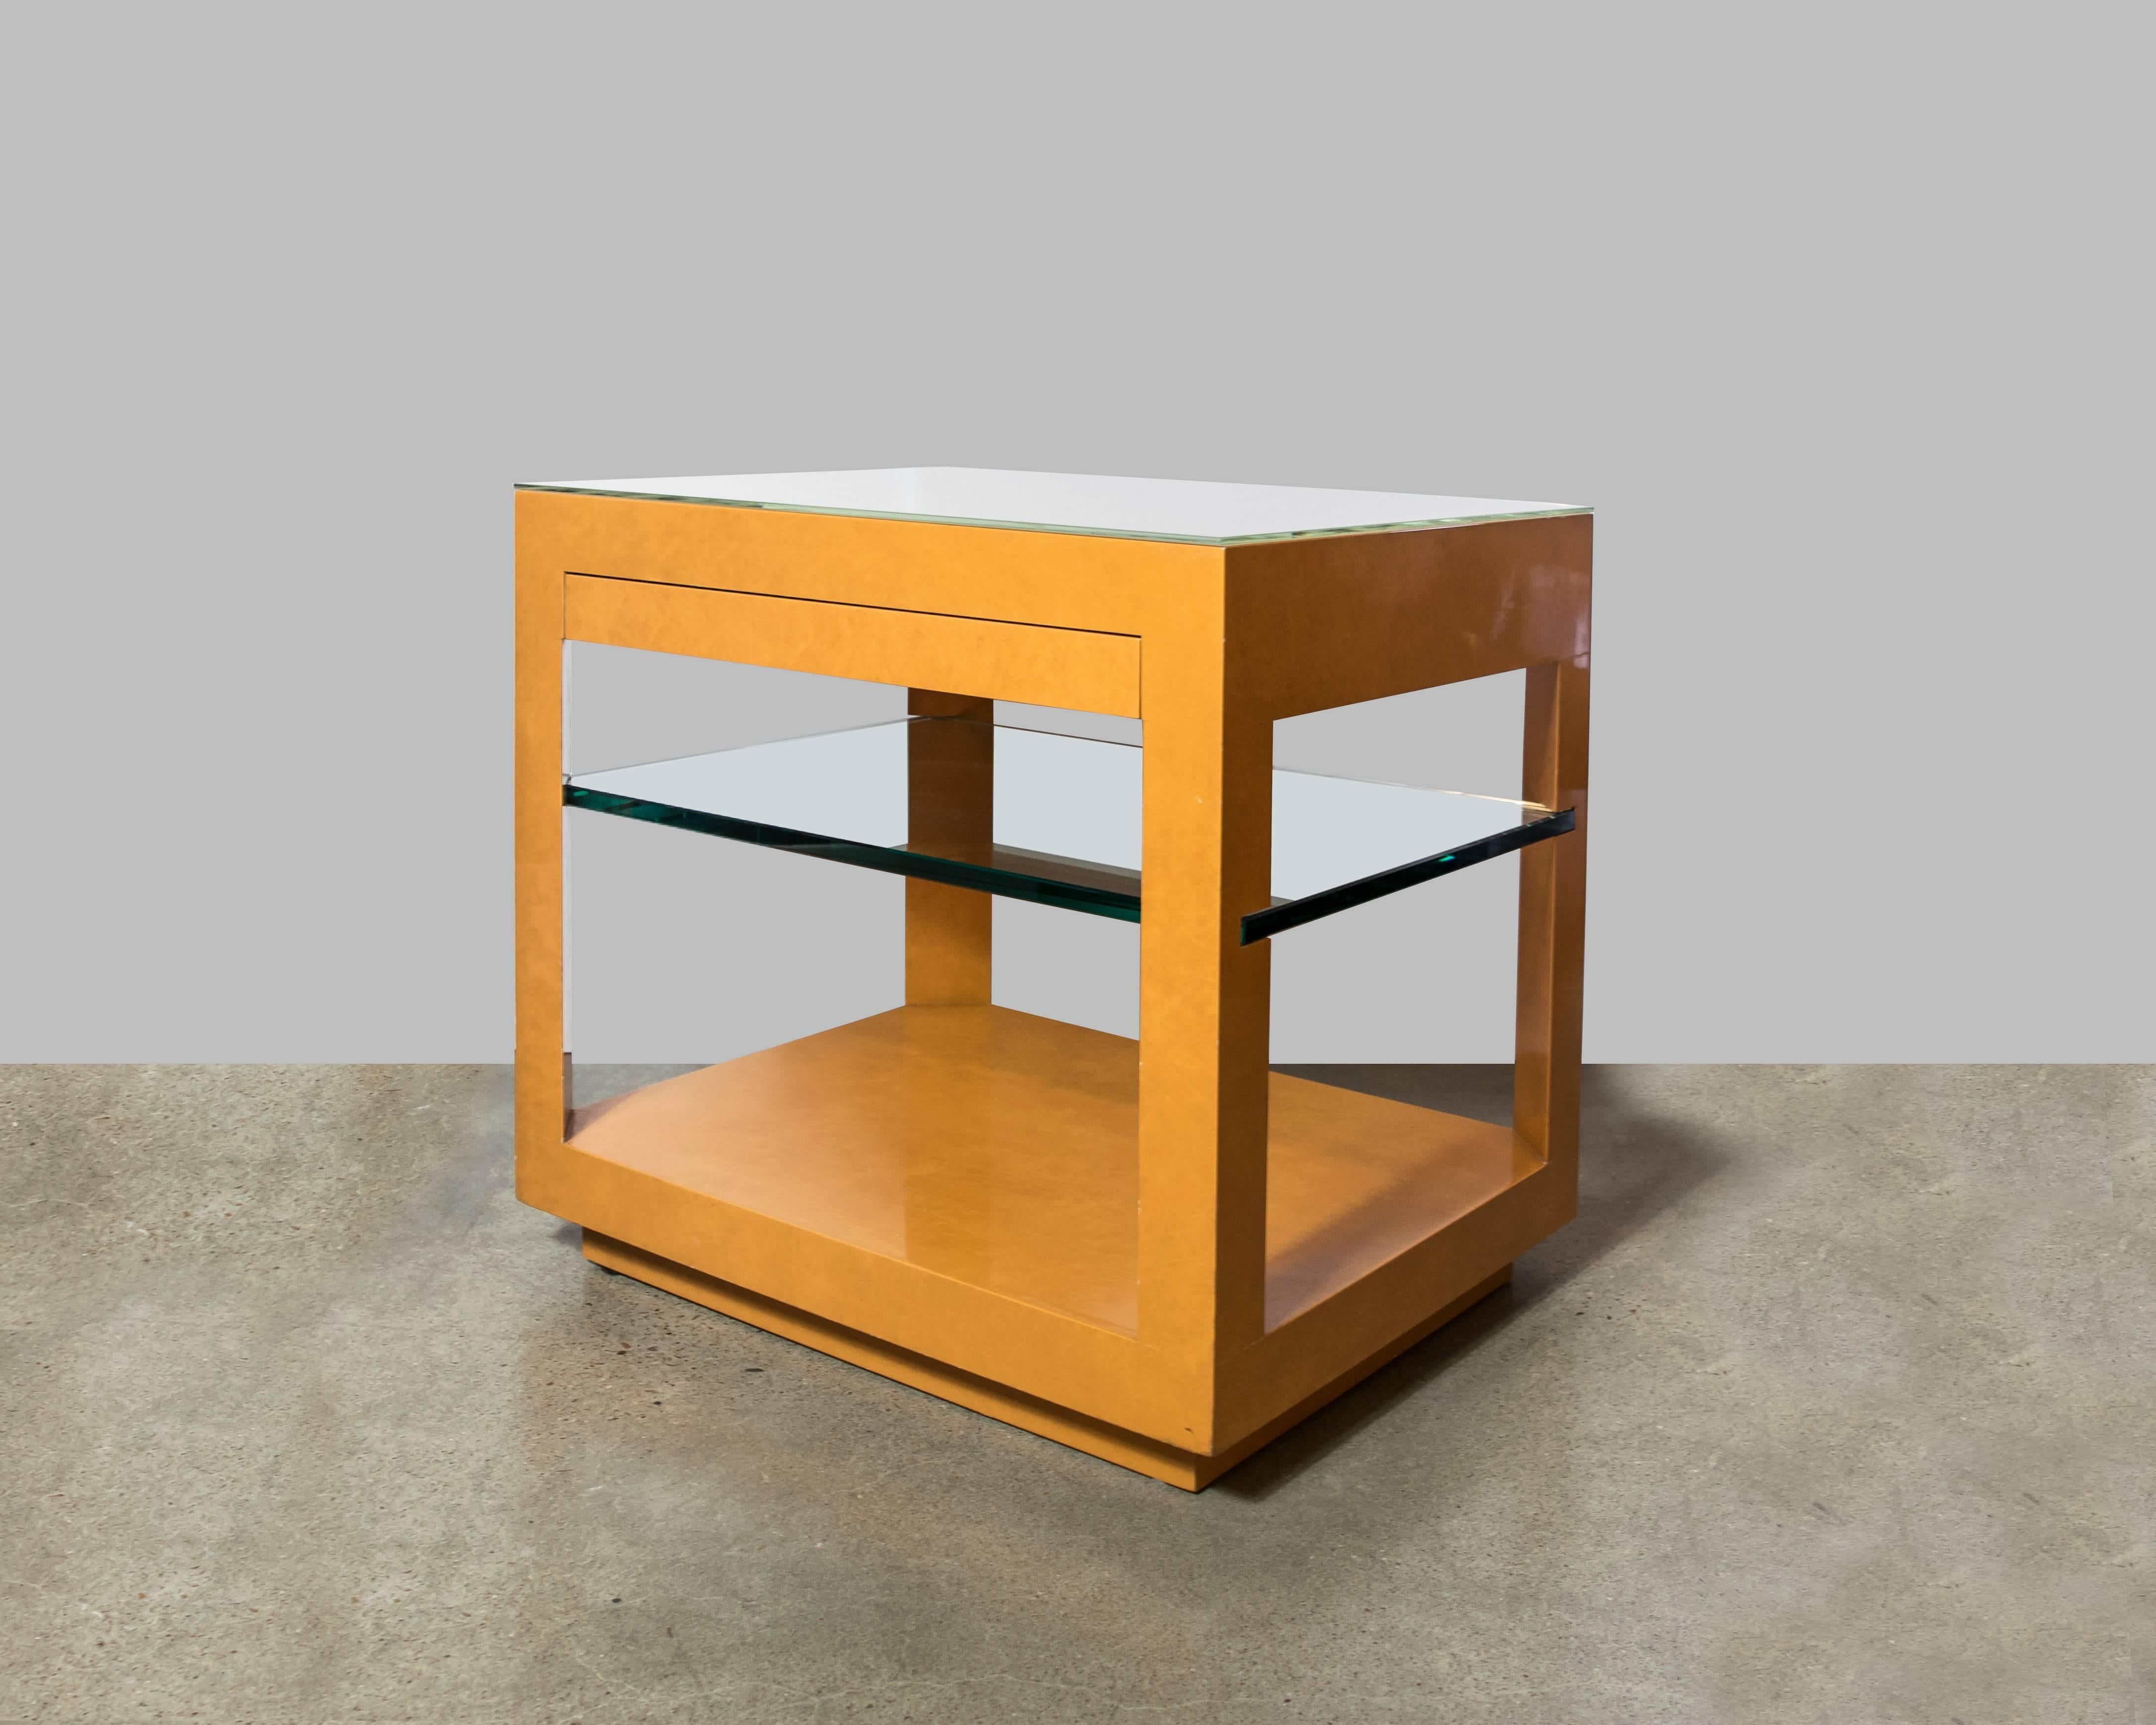 Exquisite oversized single side table in the style of Karl Springer with a single drawer and a one inch thick glass shelf. Very well-made, with a few minor scuffs here and there.